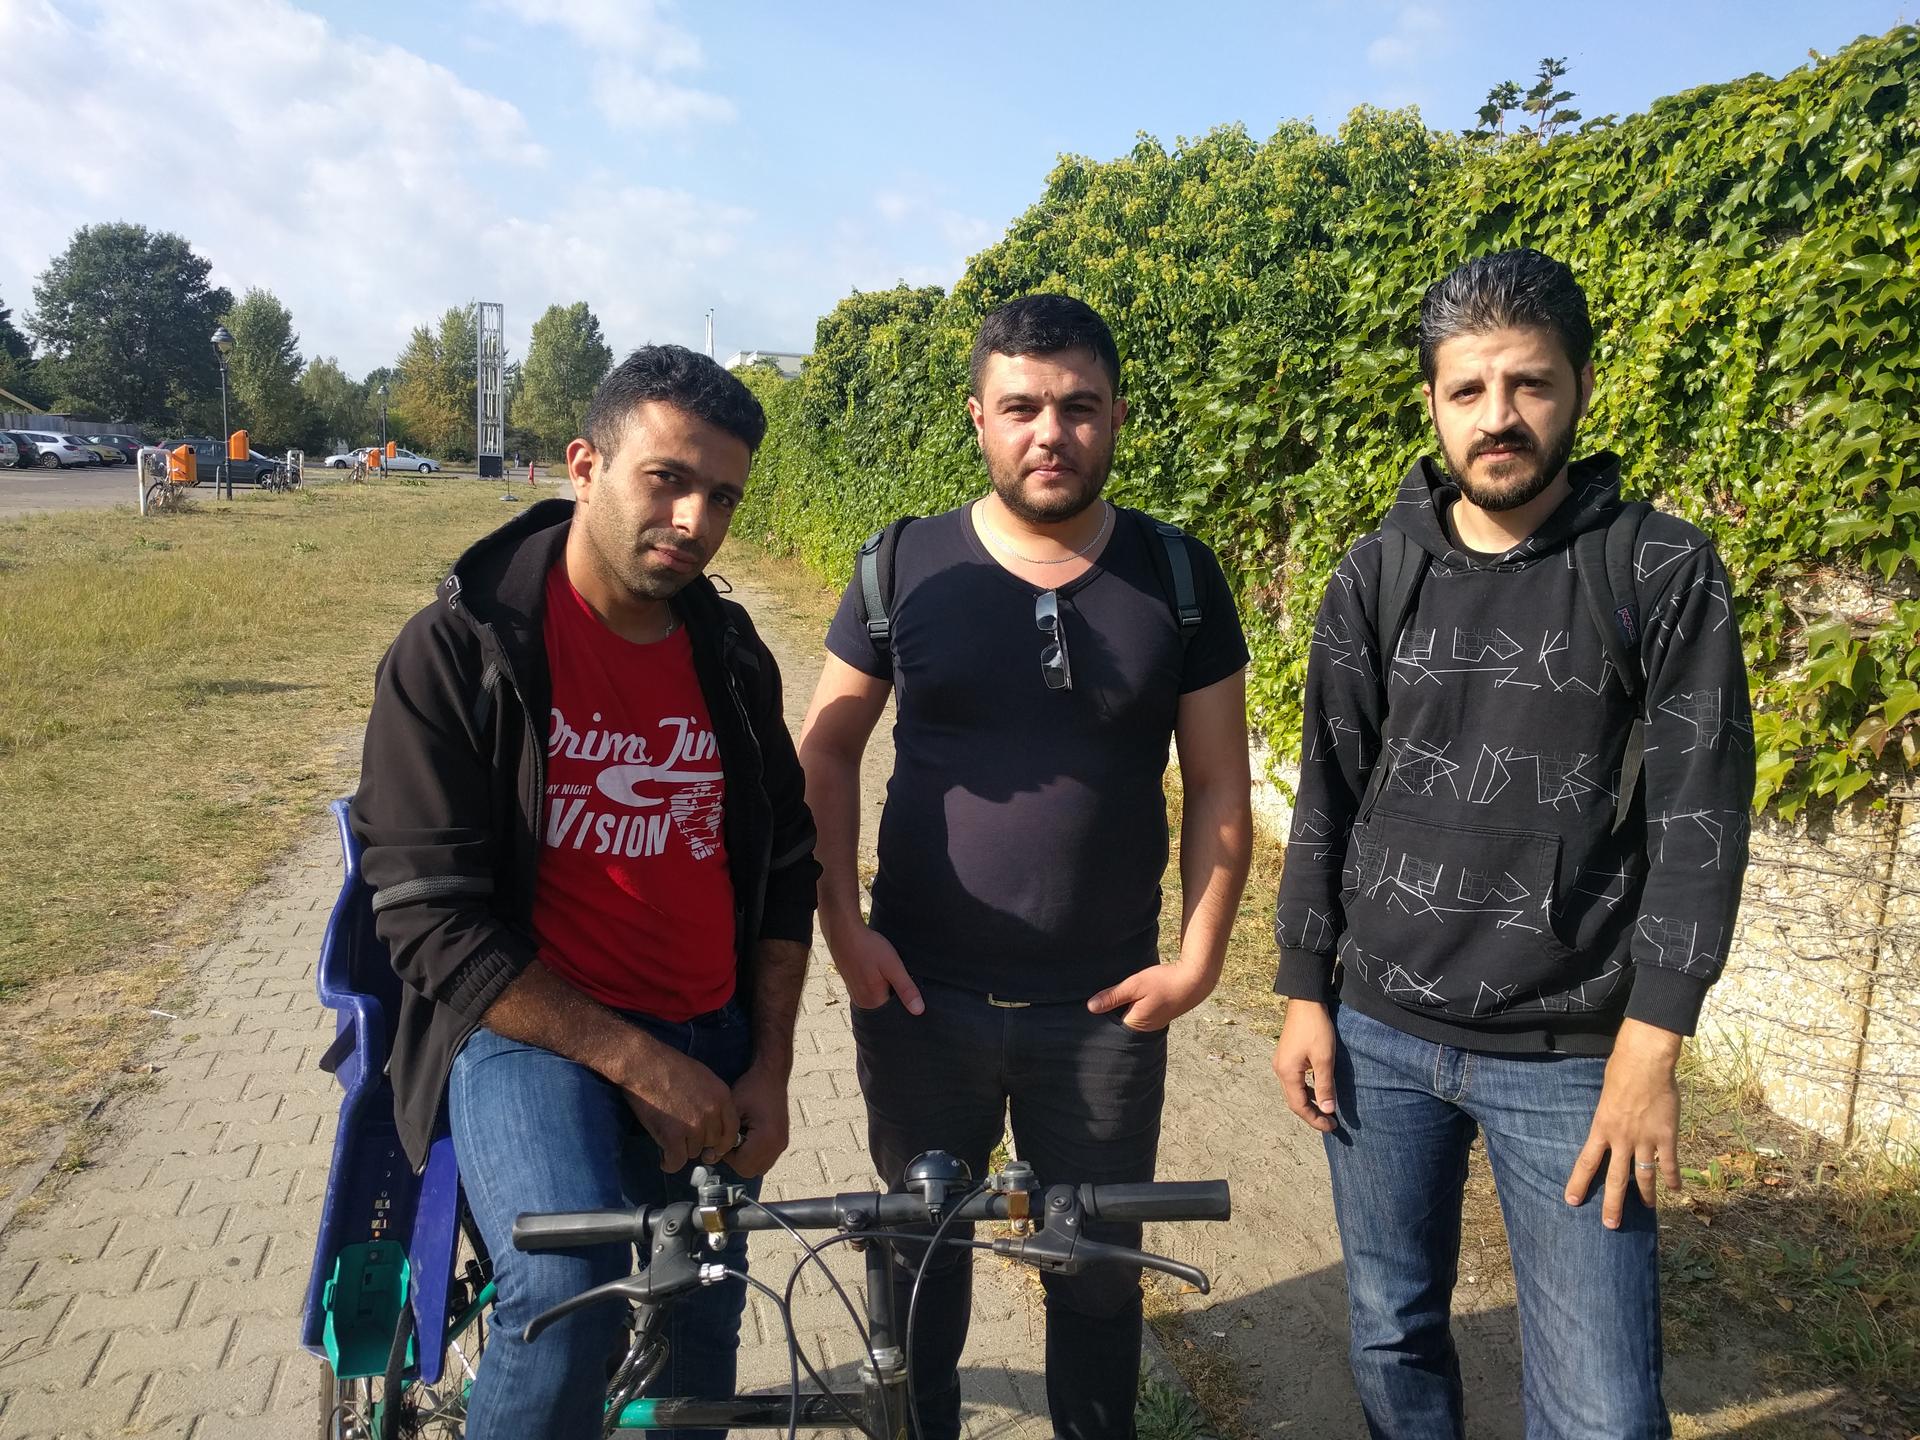 Syrian refugees escaping war back home, seek to make a new life in Berlin. Fadi, 28, a former car dealer in Hama, is in the middle; Ahmed, 28, a tailor from Aleppo, is on the right